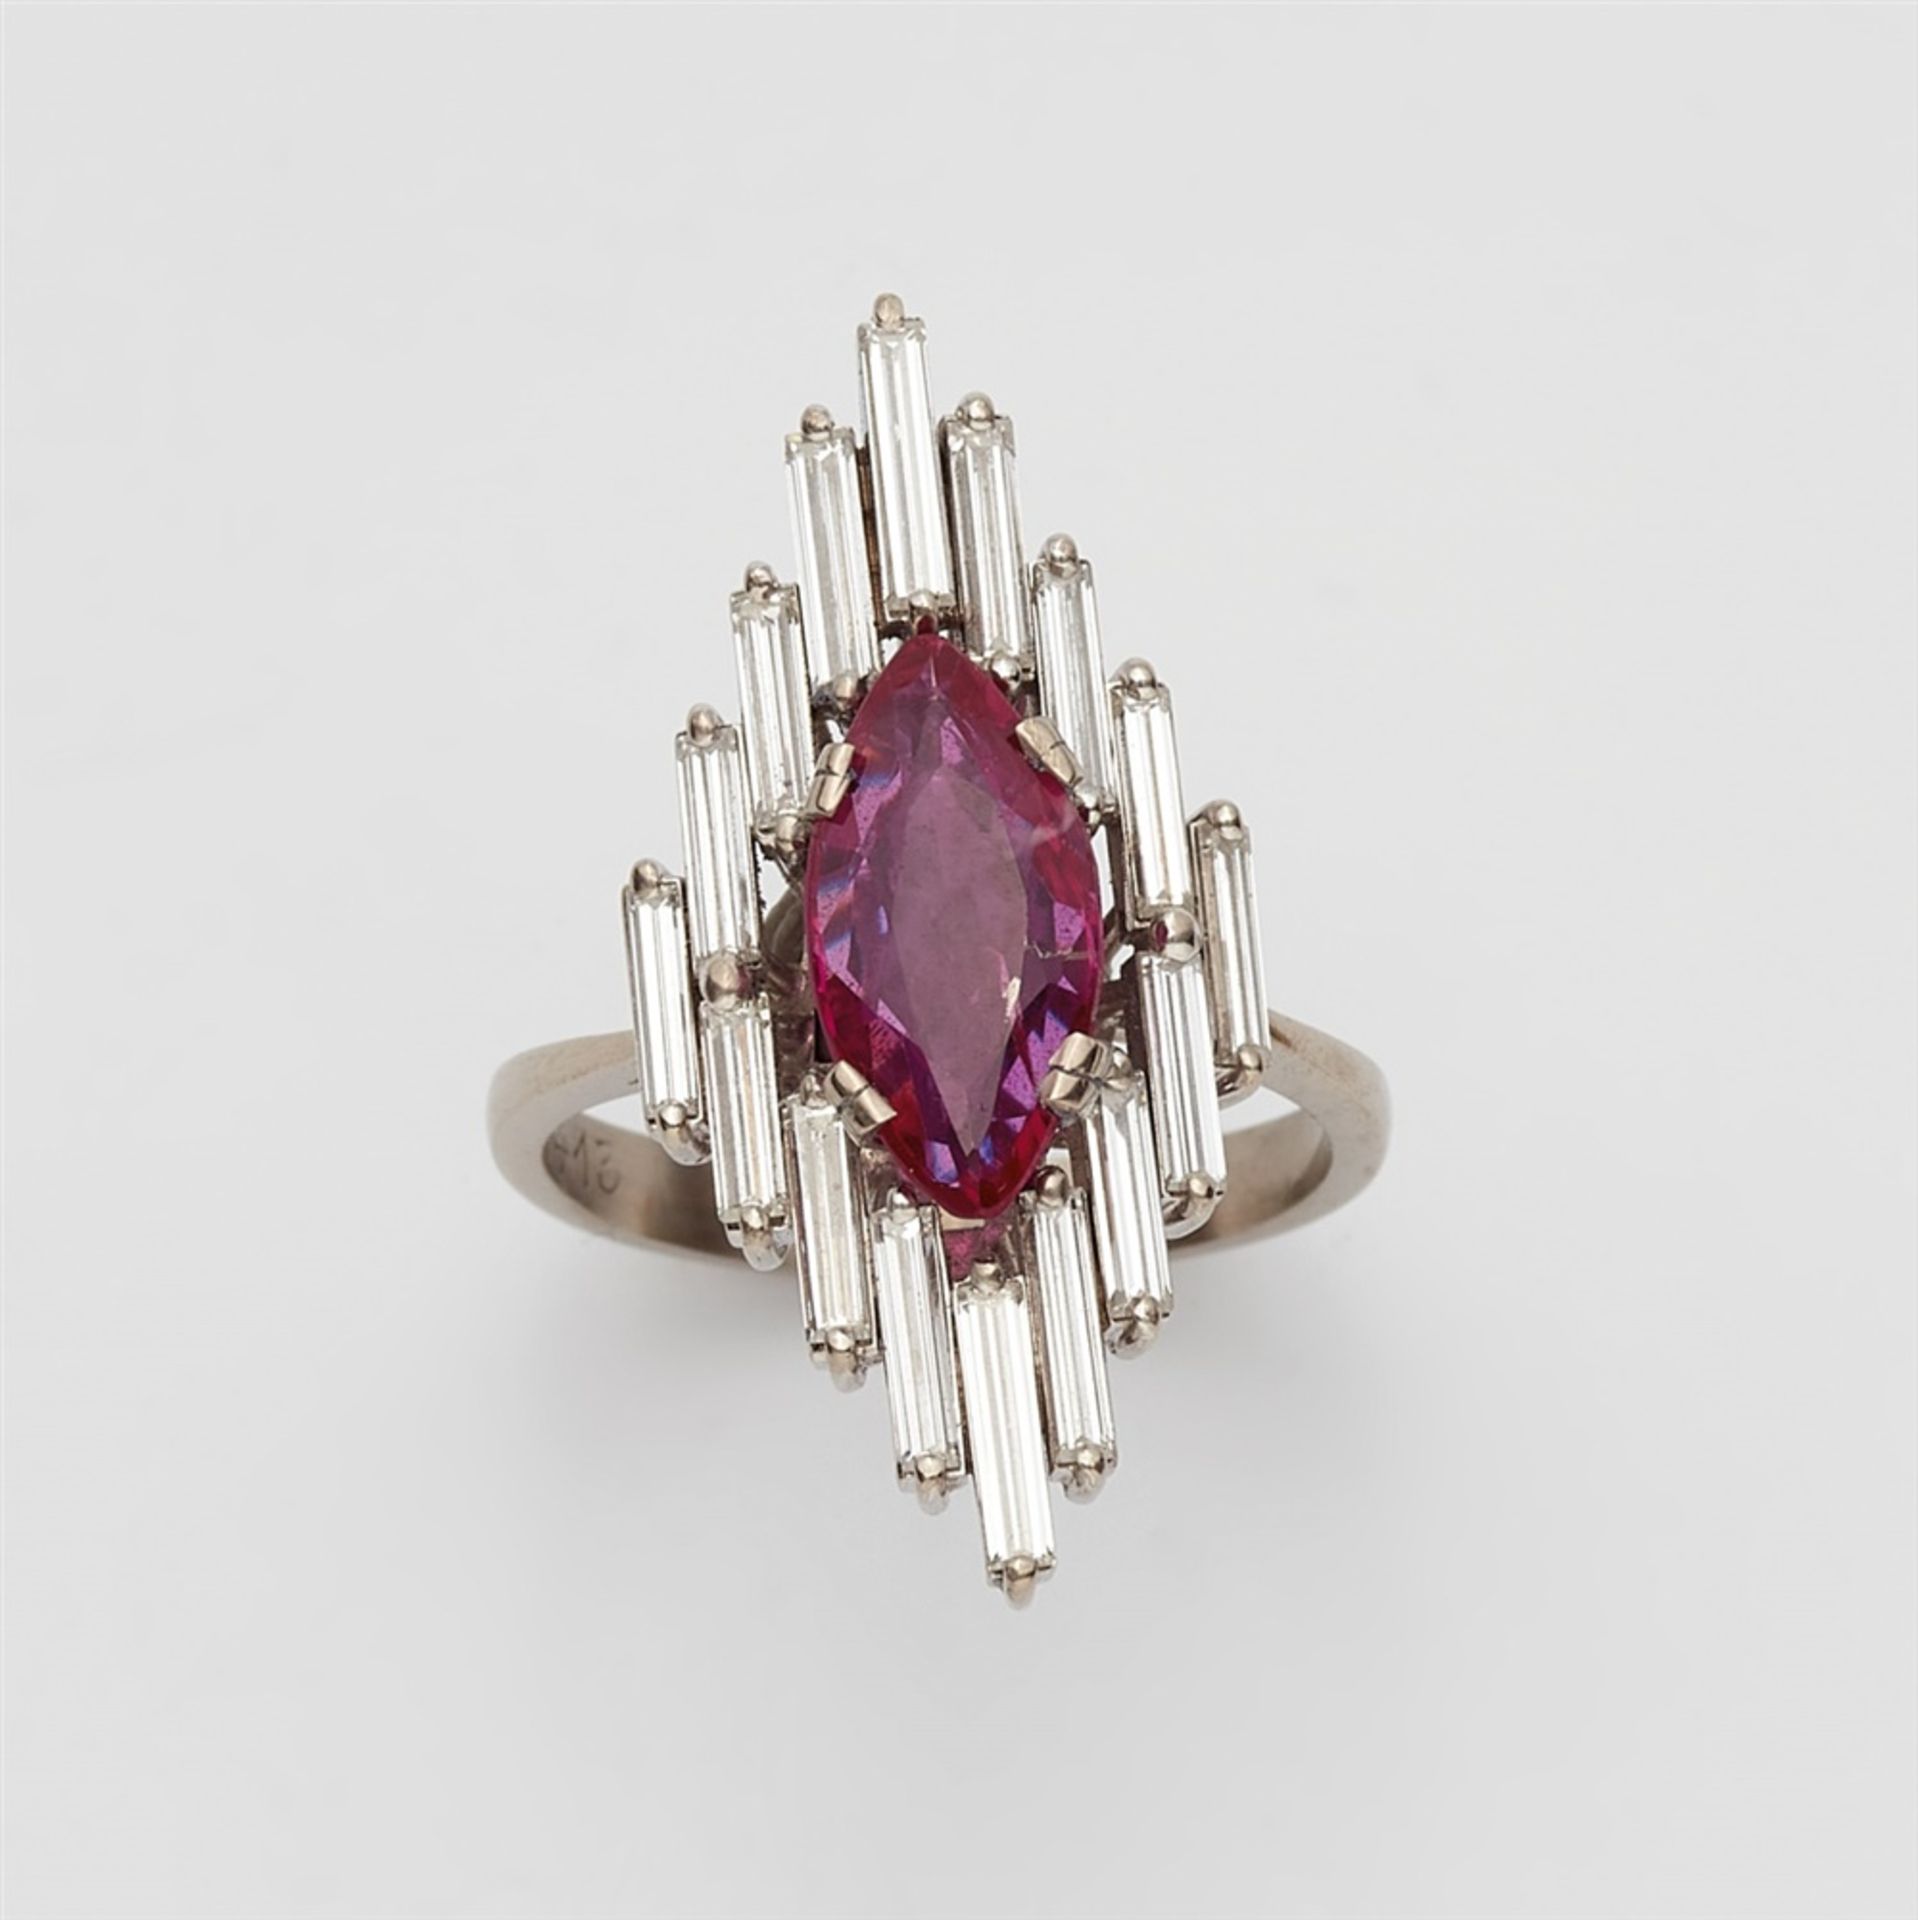 An 18k white gold and diamond marquise ring with a Burmese rubyThe elongated bezel set with a